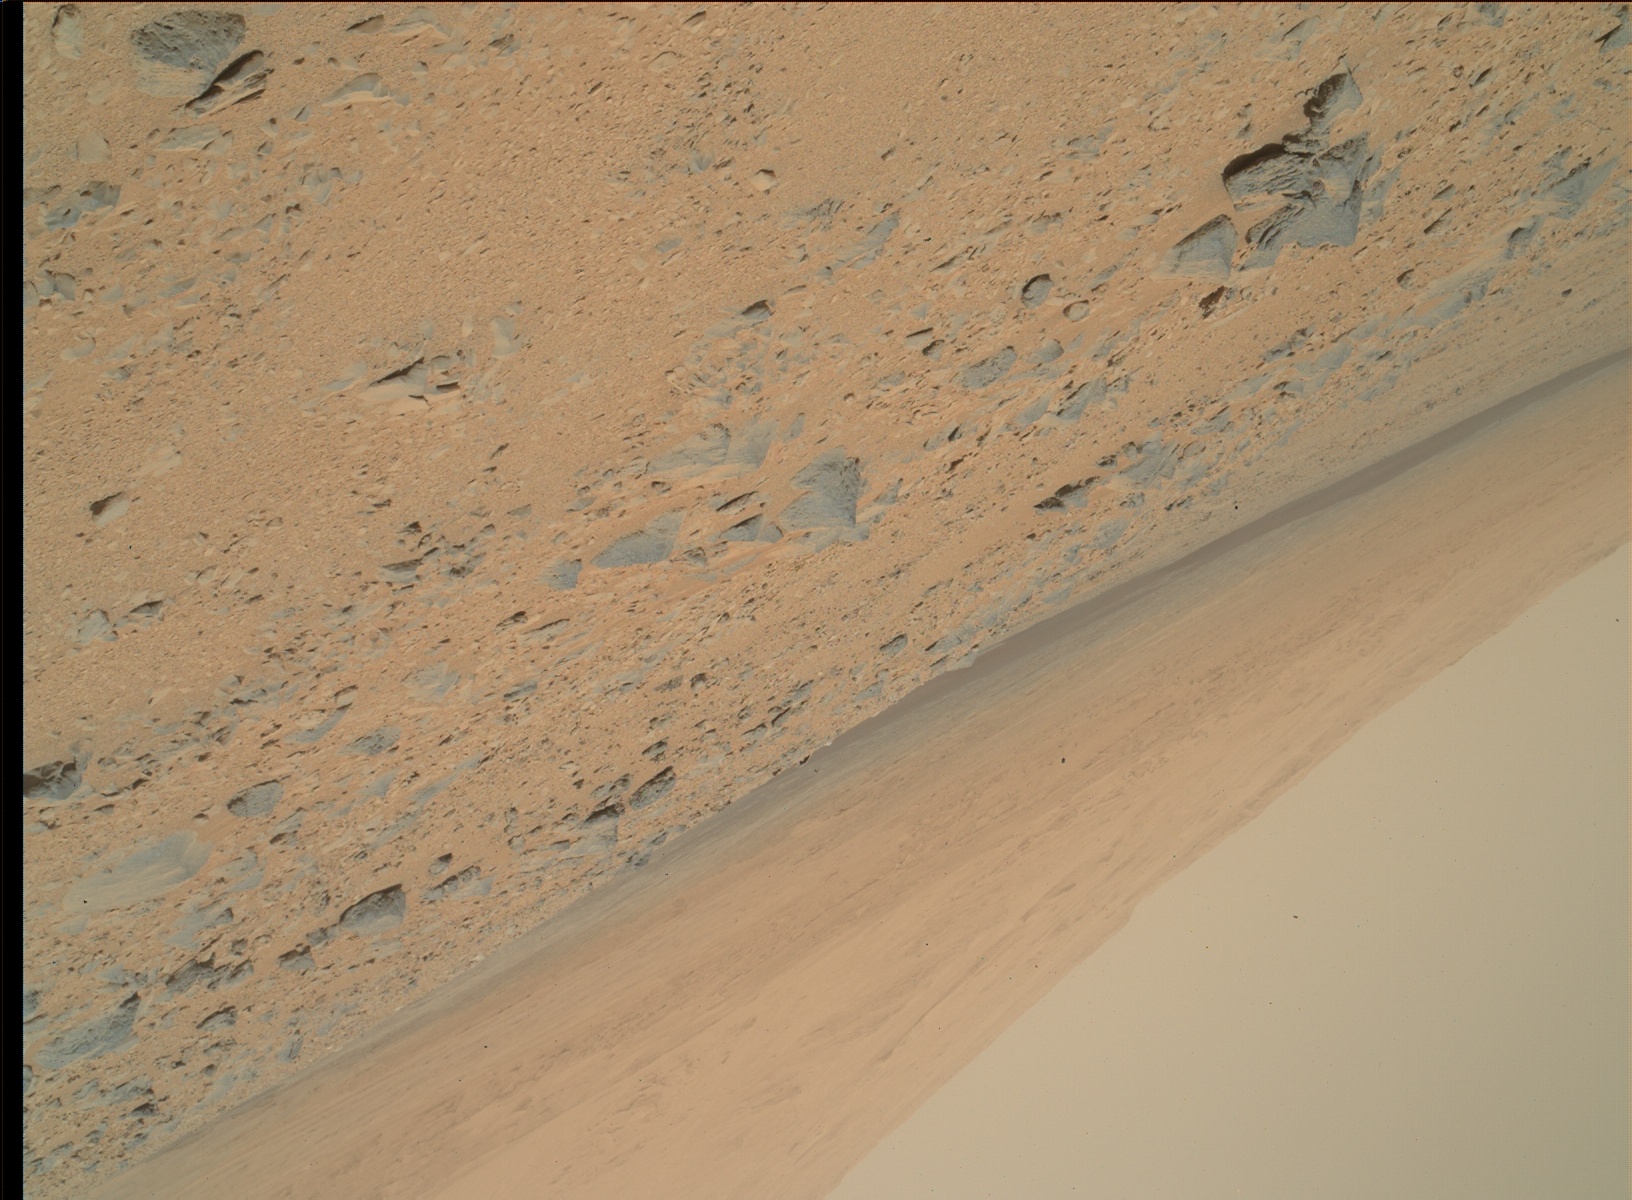 Nasa's Mars rover Curiosity acquired this image using its Mars Hand Lens Imager (MAHLI) on Sol 331